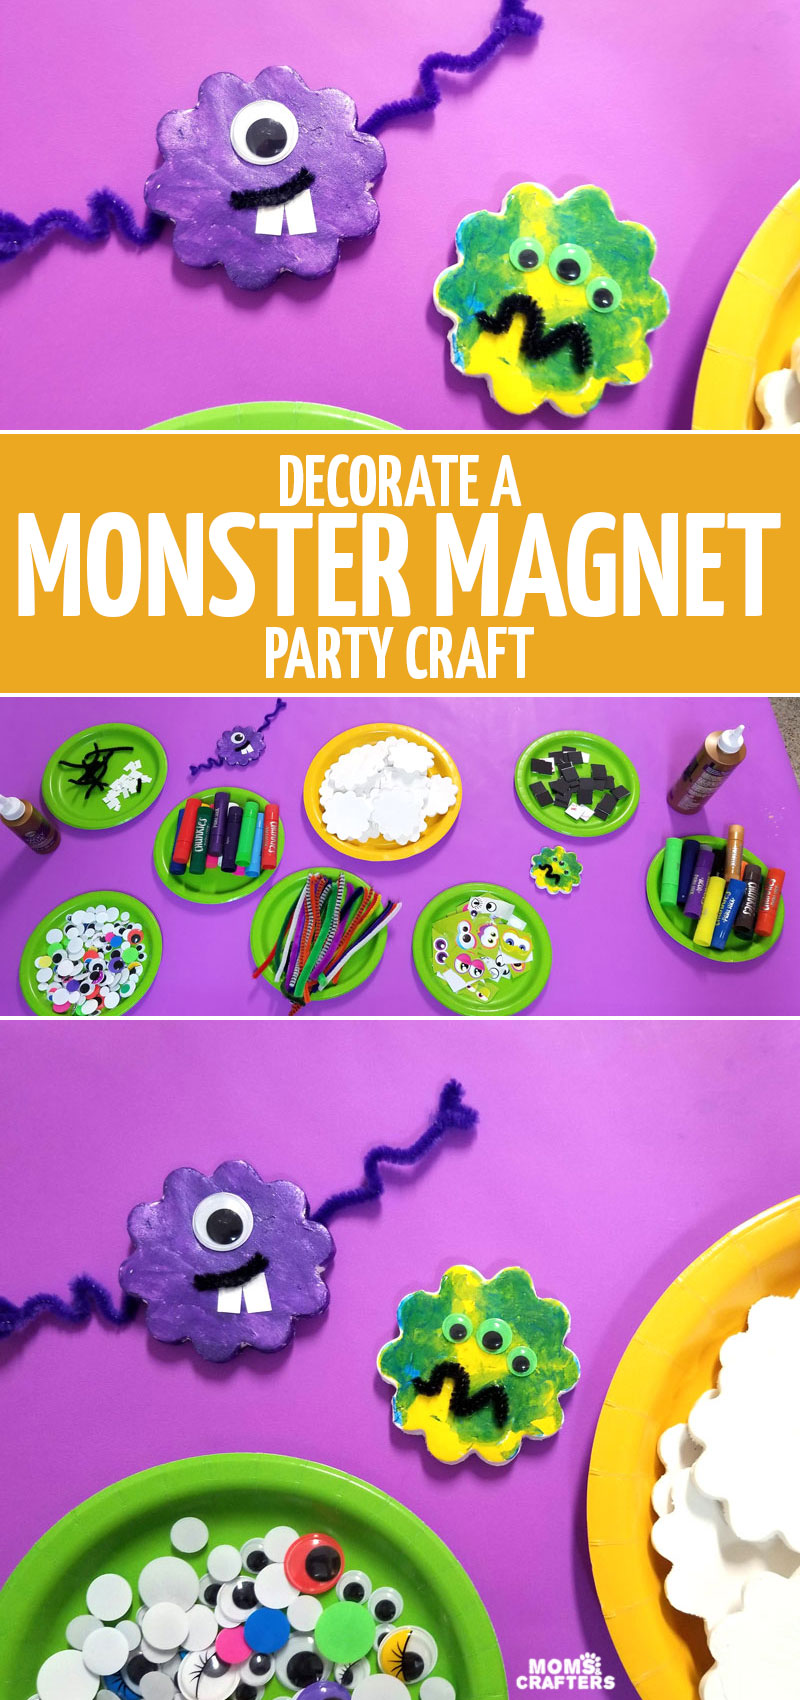 Monster Craft Invitation - Decorate Magnets! * Moms and Crafters